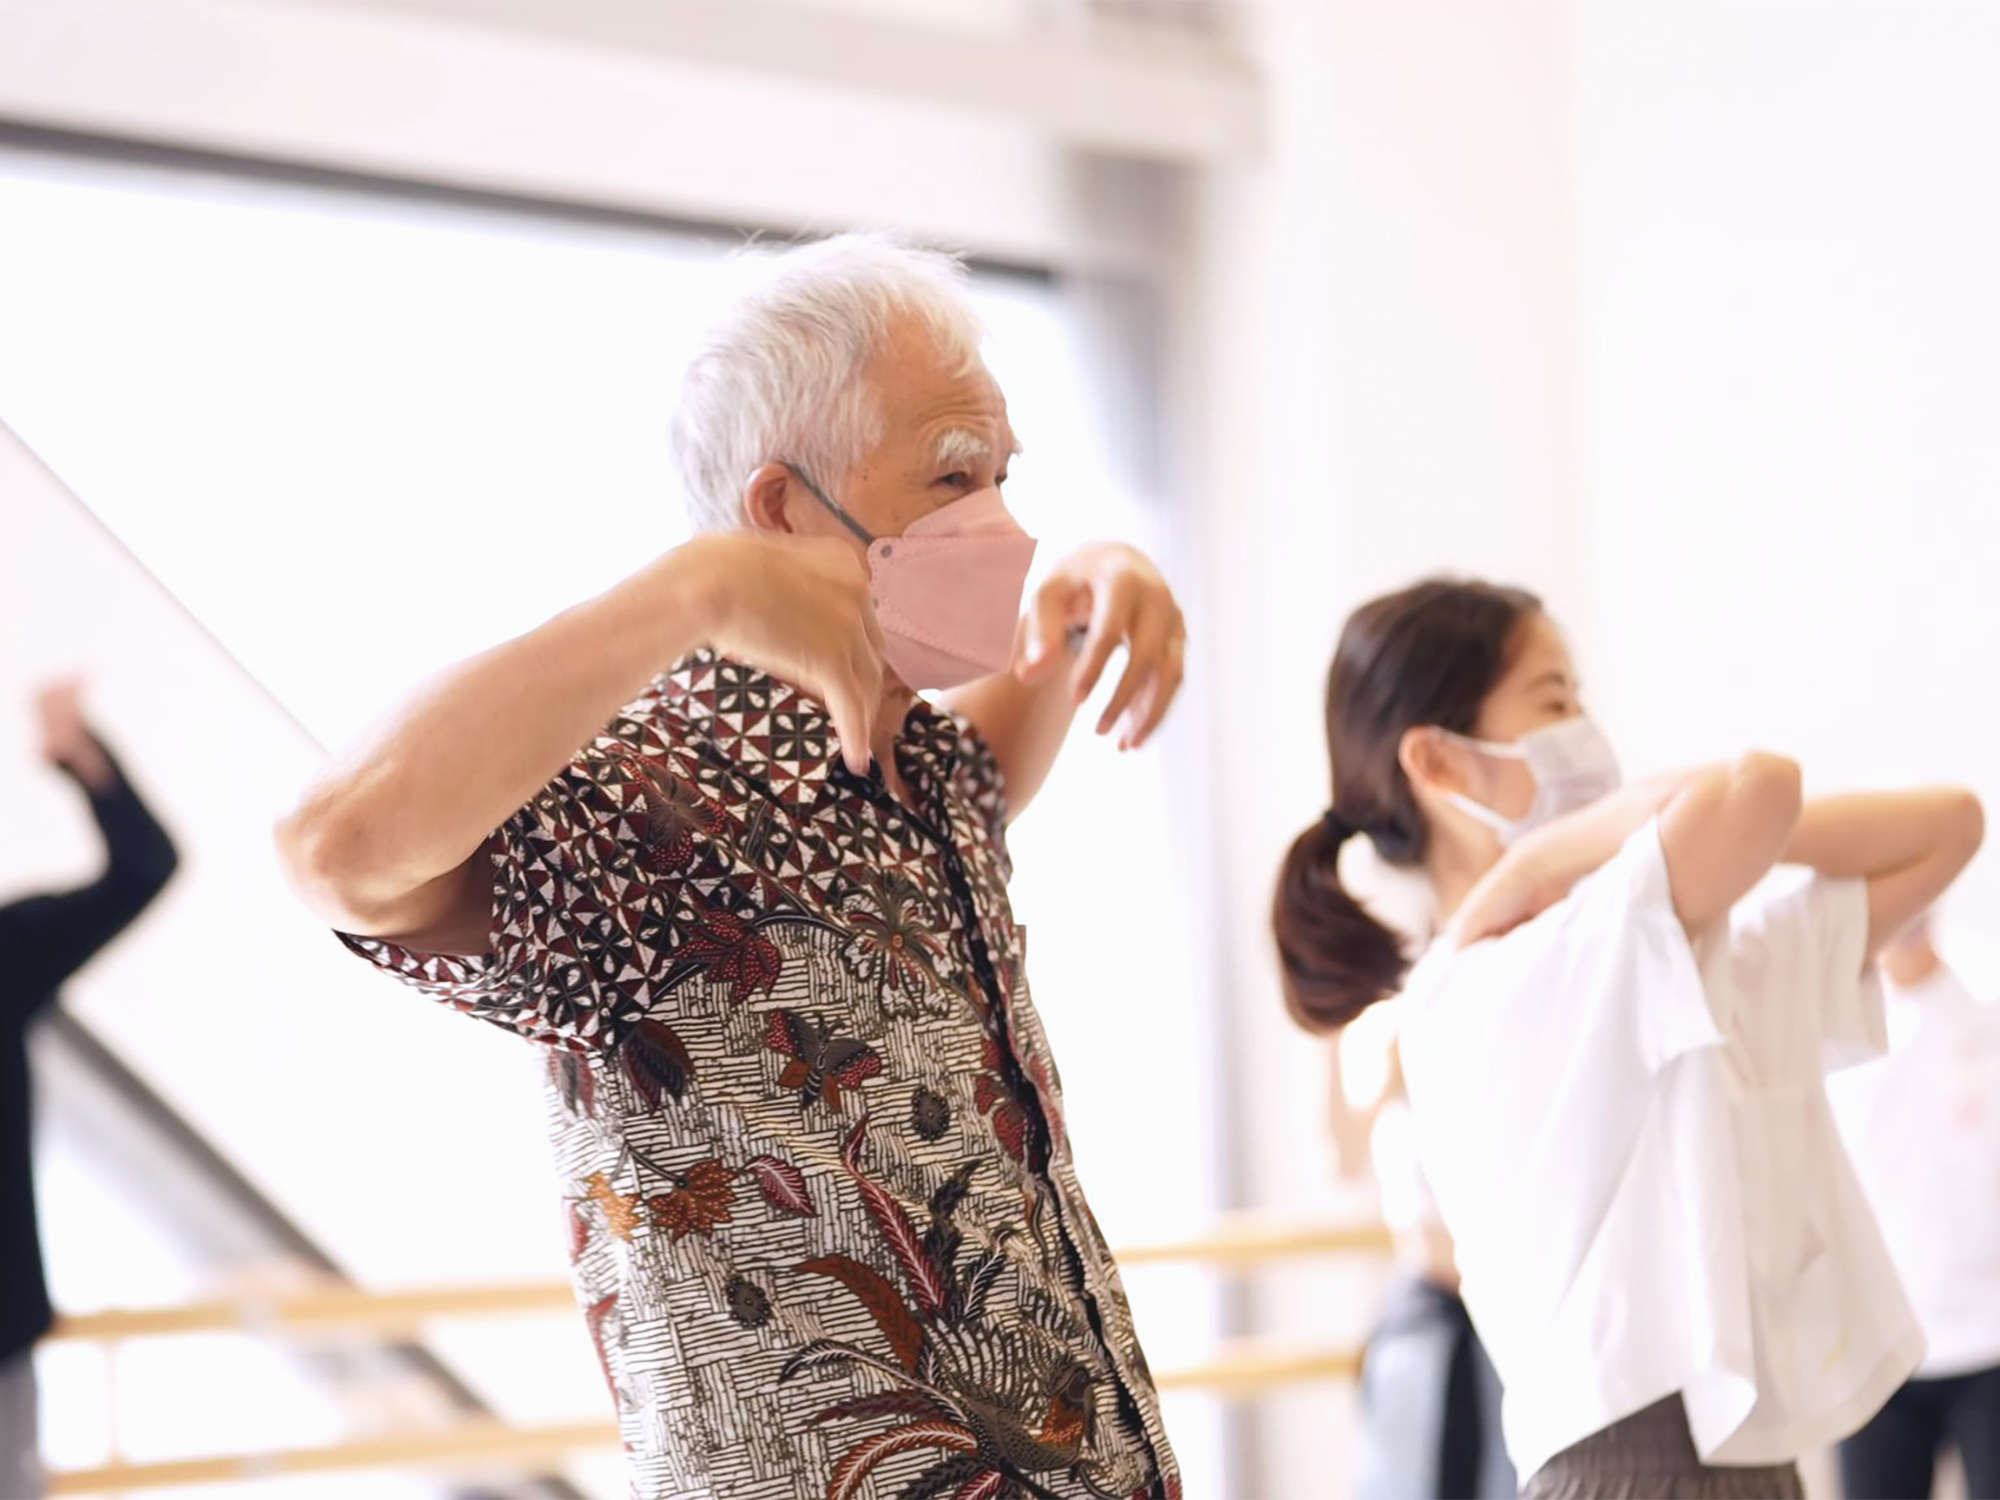 In a dance studio, an old man dancing beside a young lady, side by side, doing similar movements with their hands on their own shoulders, elbows pointing outside, the photo shows that anyone can dance, no matter their respective age, gender and abilities.